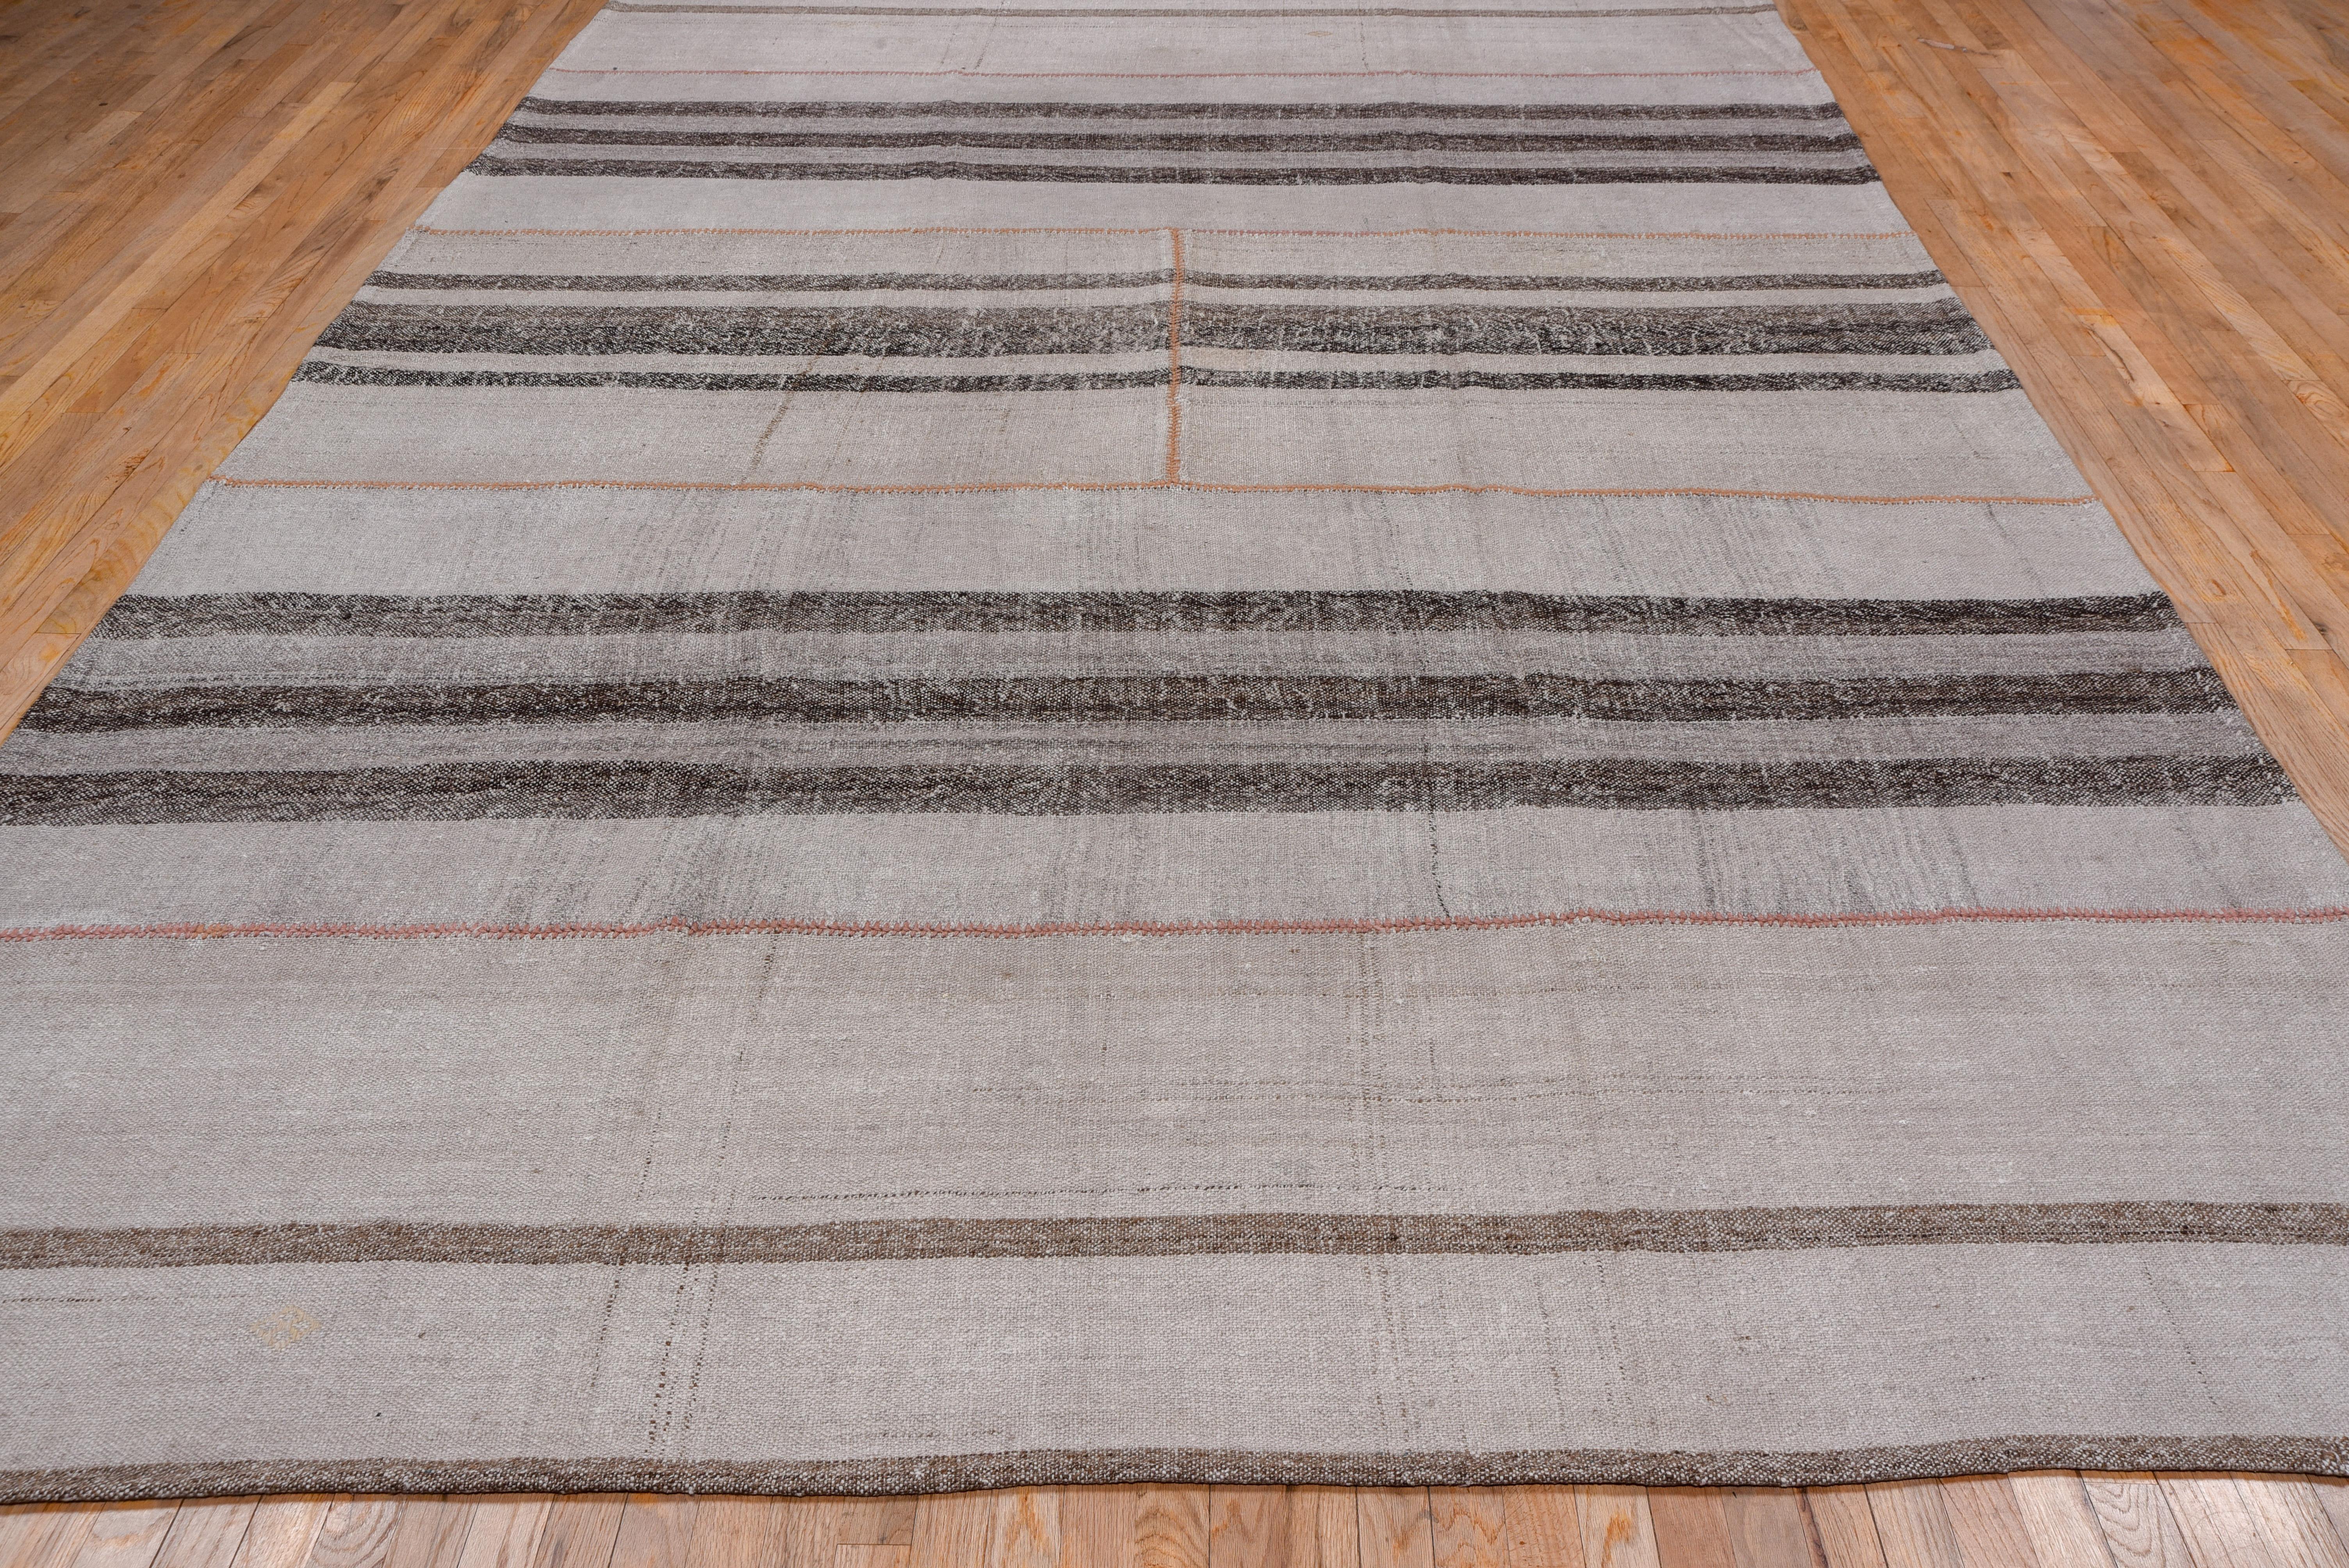 Constructed of six parts in five horizontal bands, with warp-faced wool panels striped beige and brown The sections were parts of long bands which were then cut up and joined to make this rustic weaving.